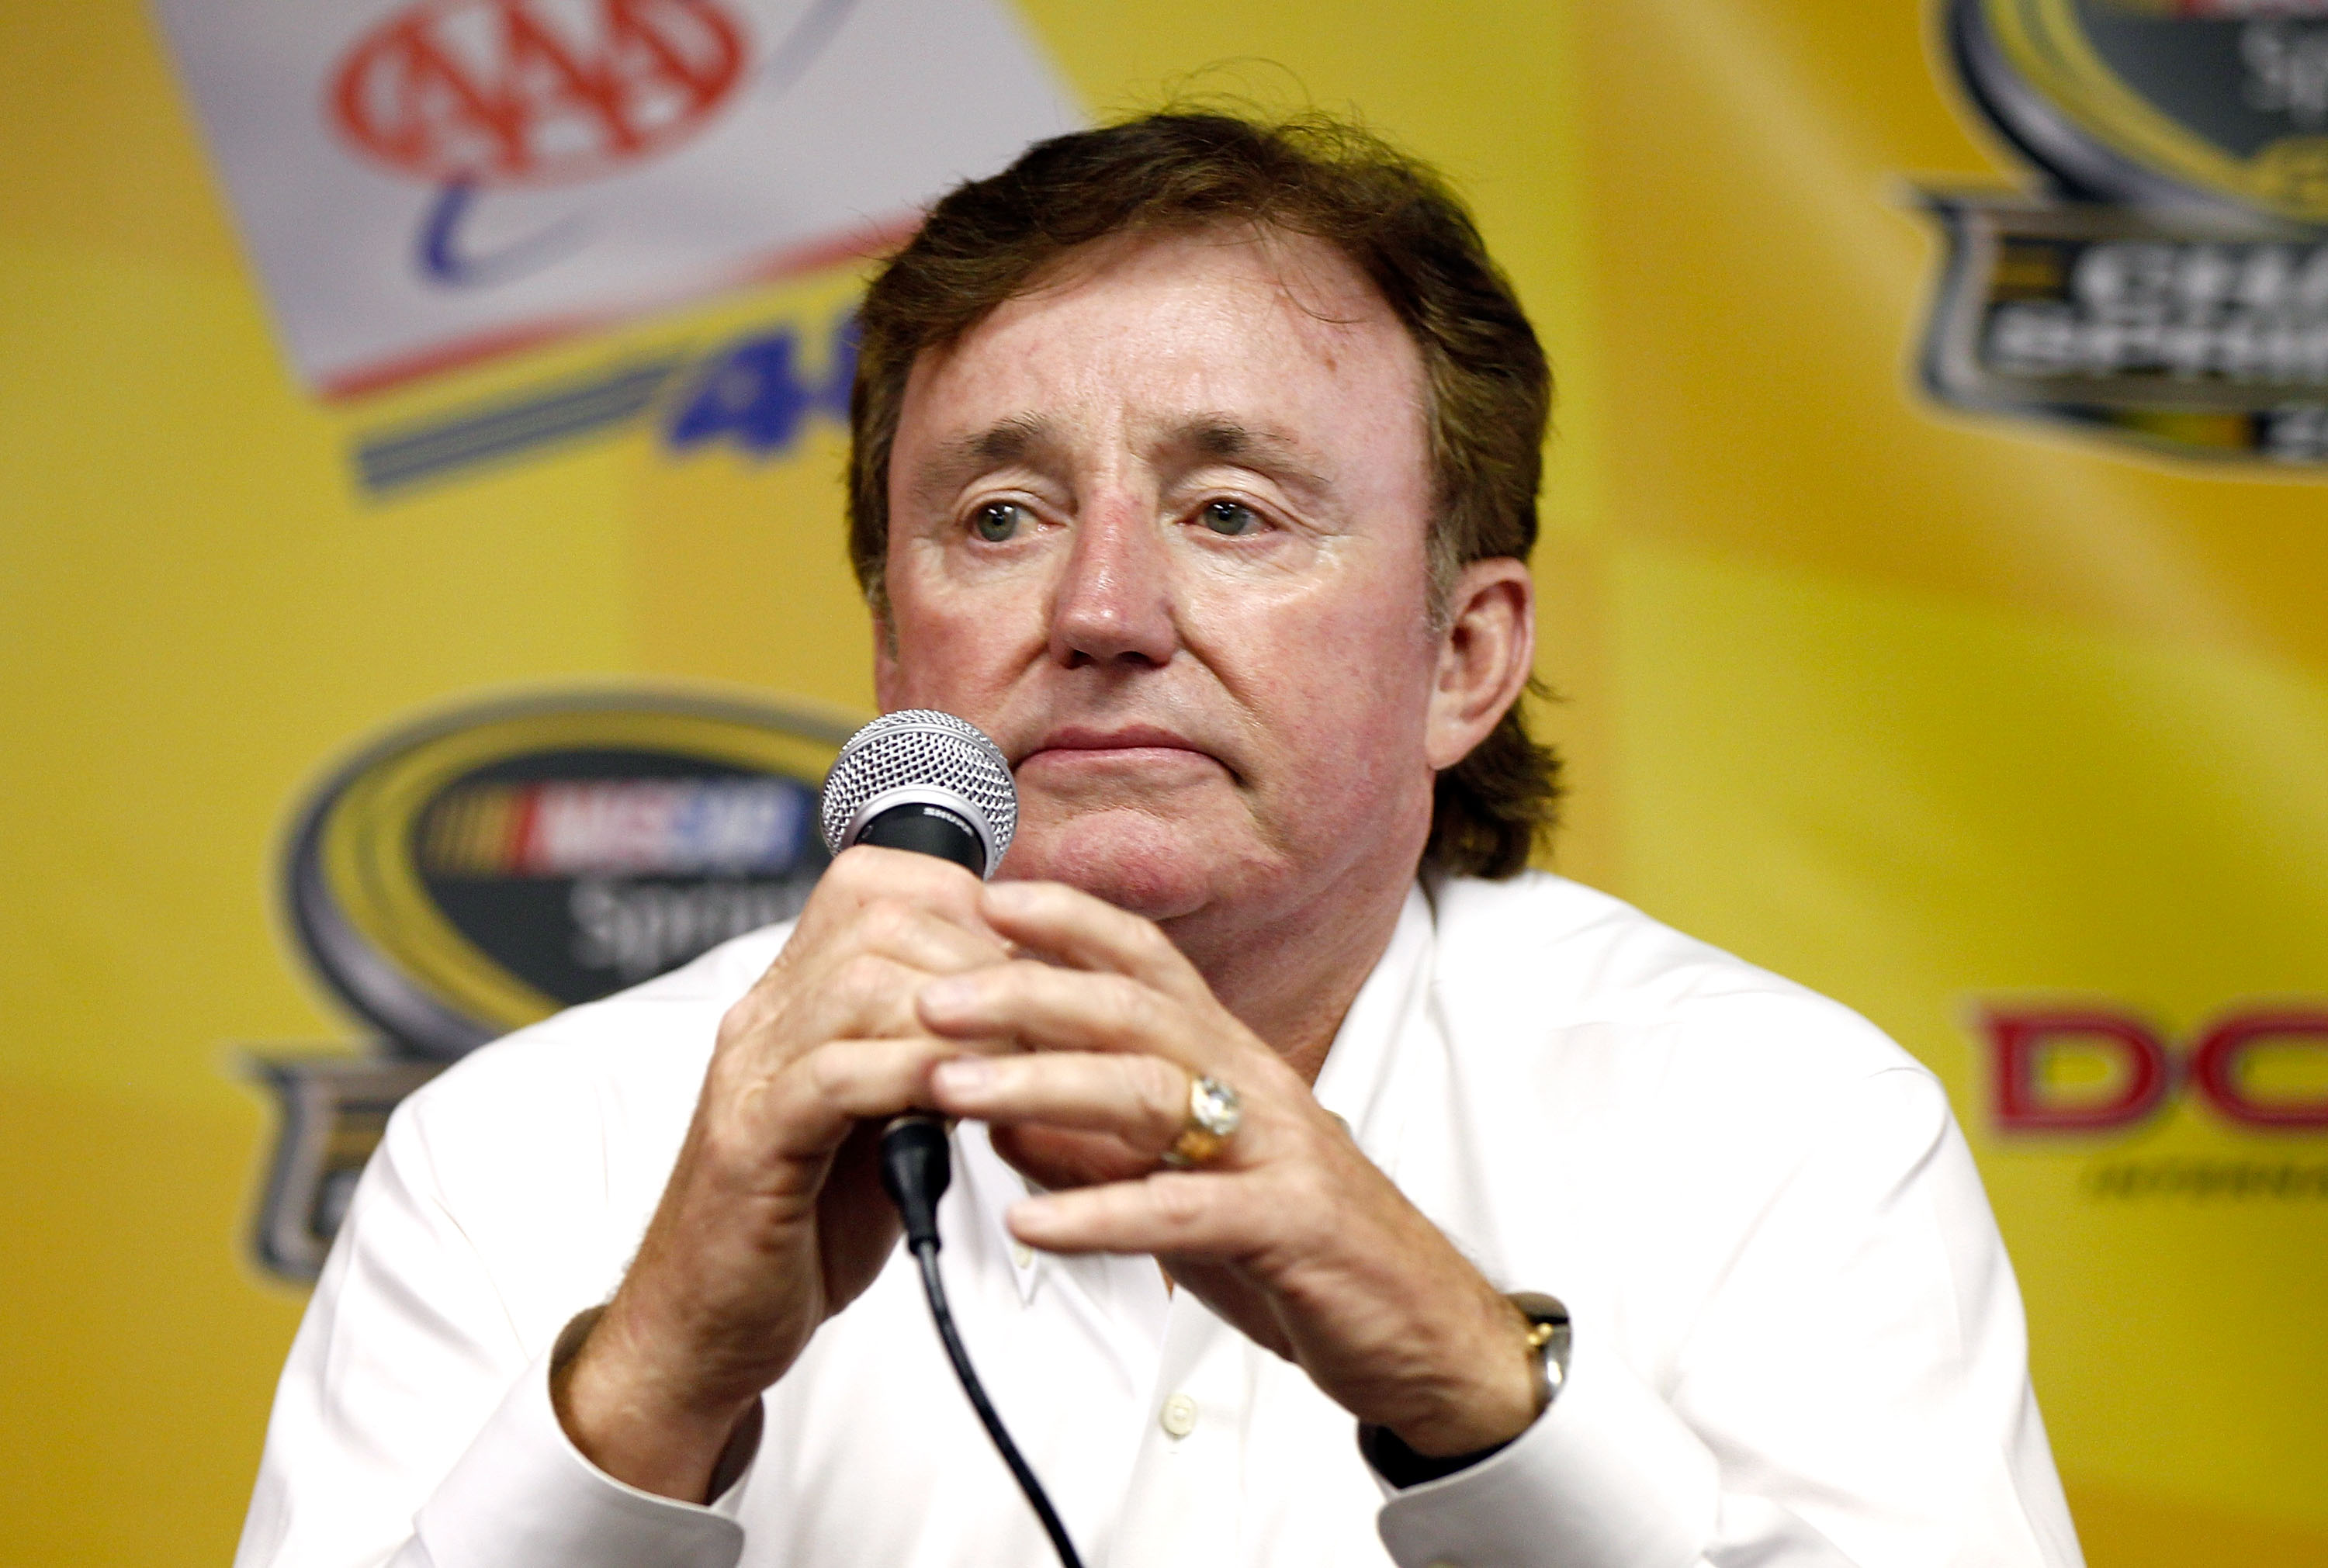 DOVER, DE - SEPTEMBER 24:  Team owner Richard Childress speaks to the media after practice for the NASCAR Sprint Cup Series AAA 400 at Dover International Speedway on September 24, 2010 in Dover, Delaware.  (Photo by Jeff Zelevansky/Getty Images for NASCA